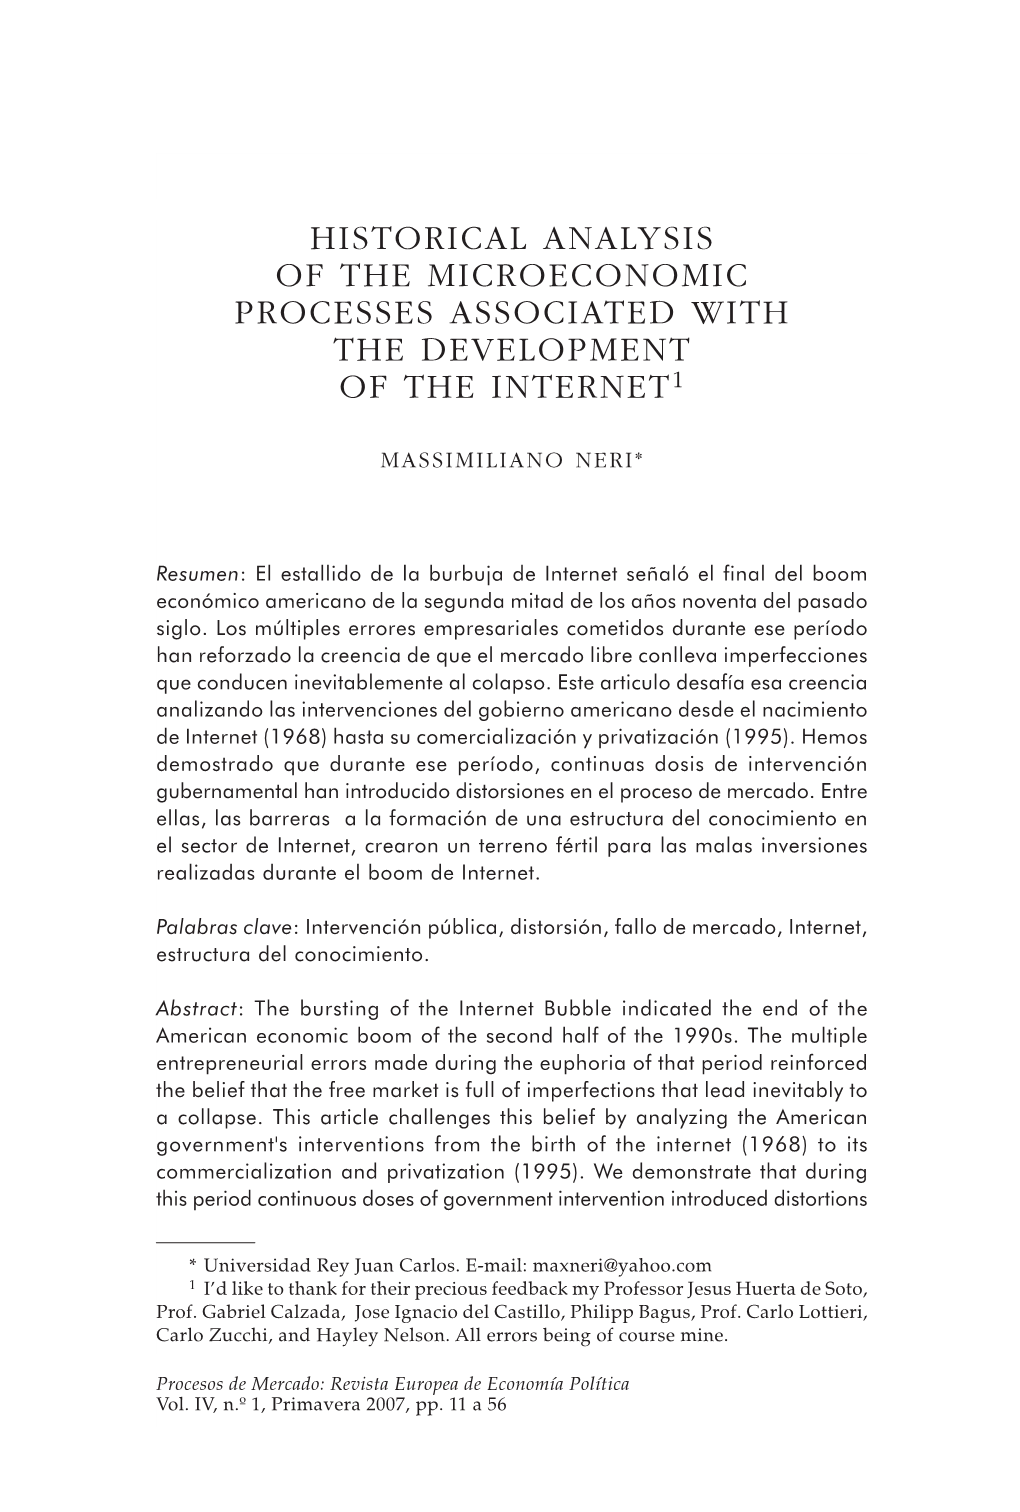 Historical Analysis of the Microeconomic Processes Associated with the Development of the Internet1